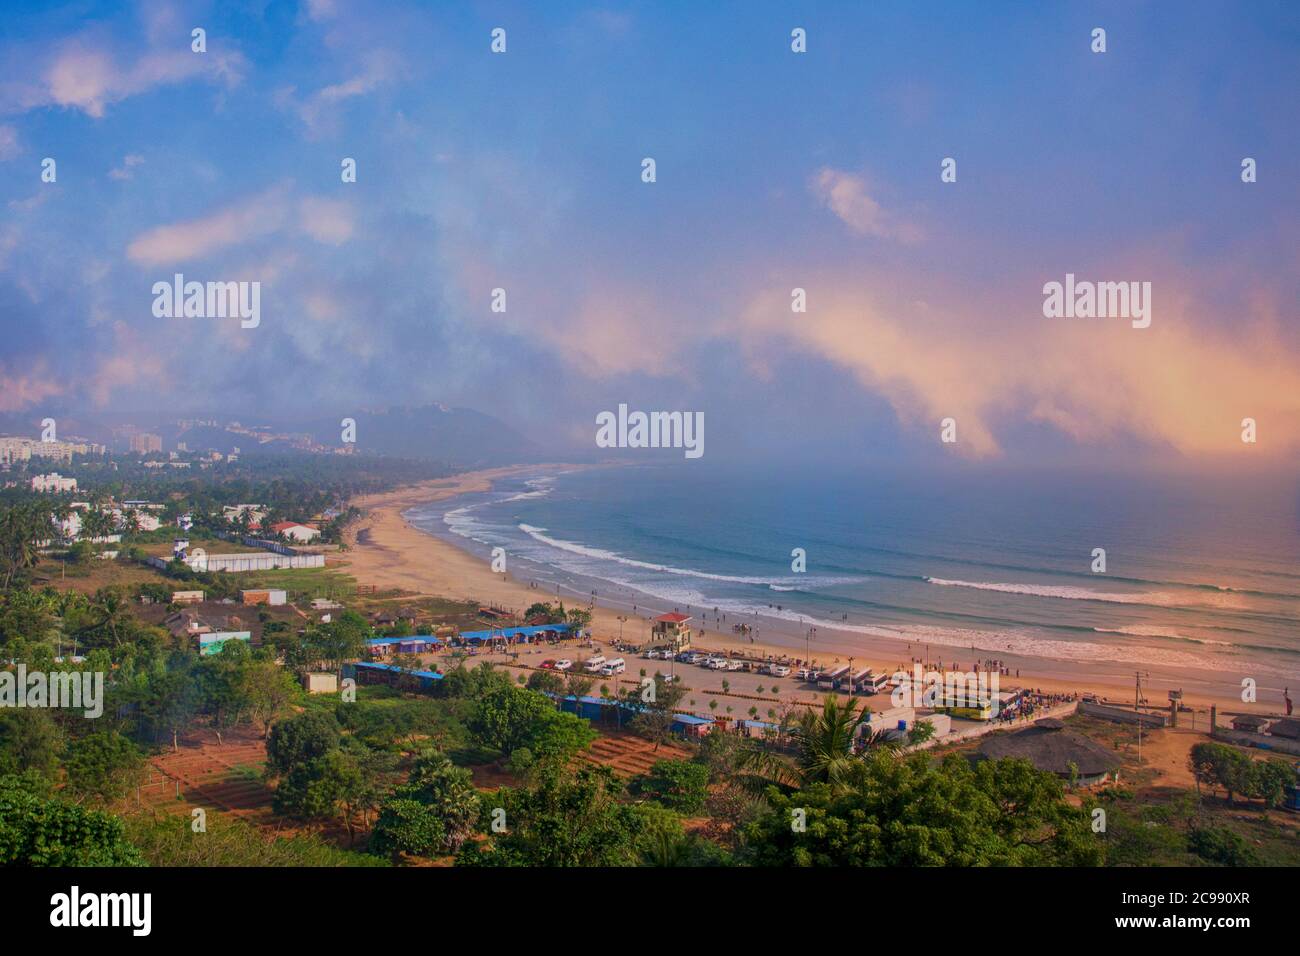 View of Visakhapatnam/ or Vizag city beside Bay of Bengal Stock Photo